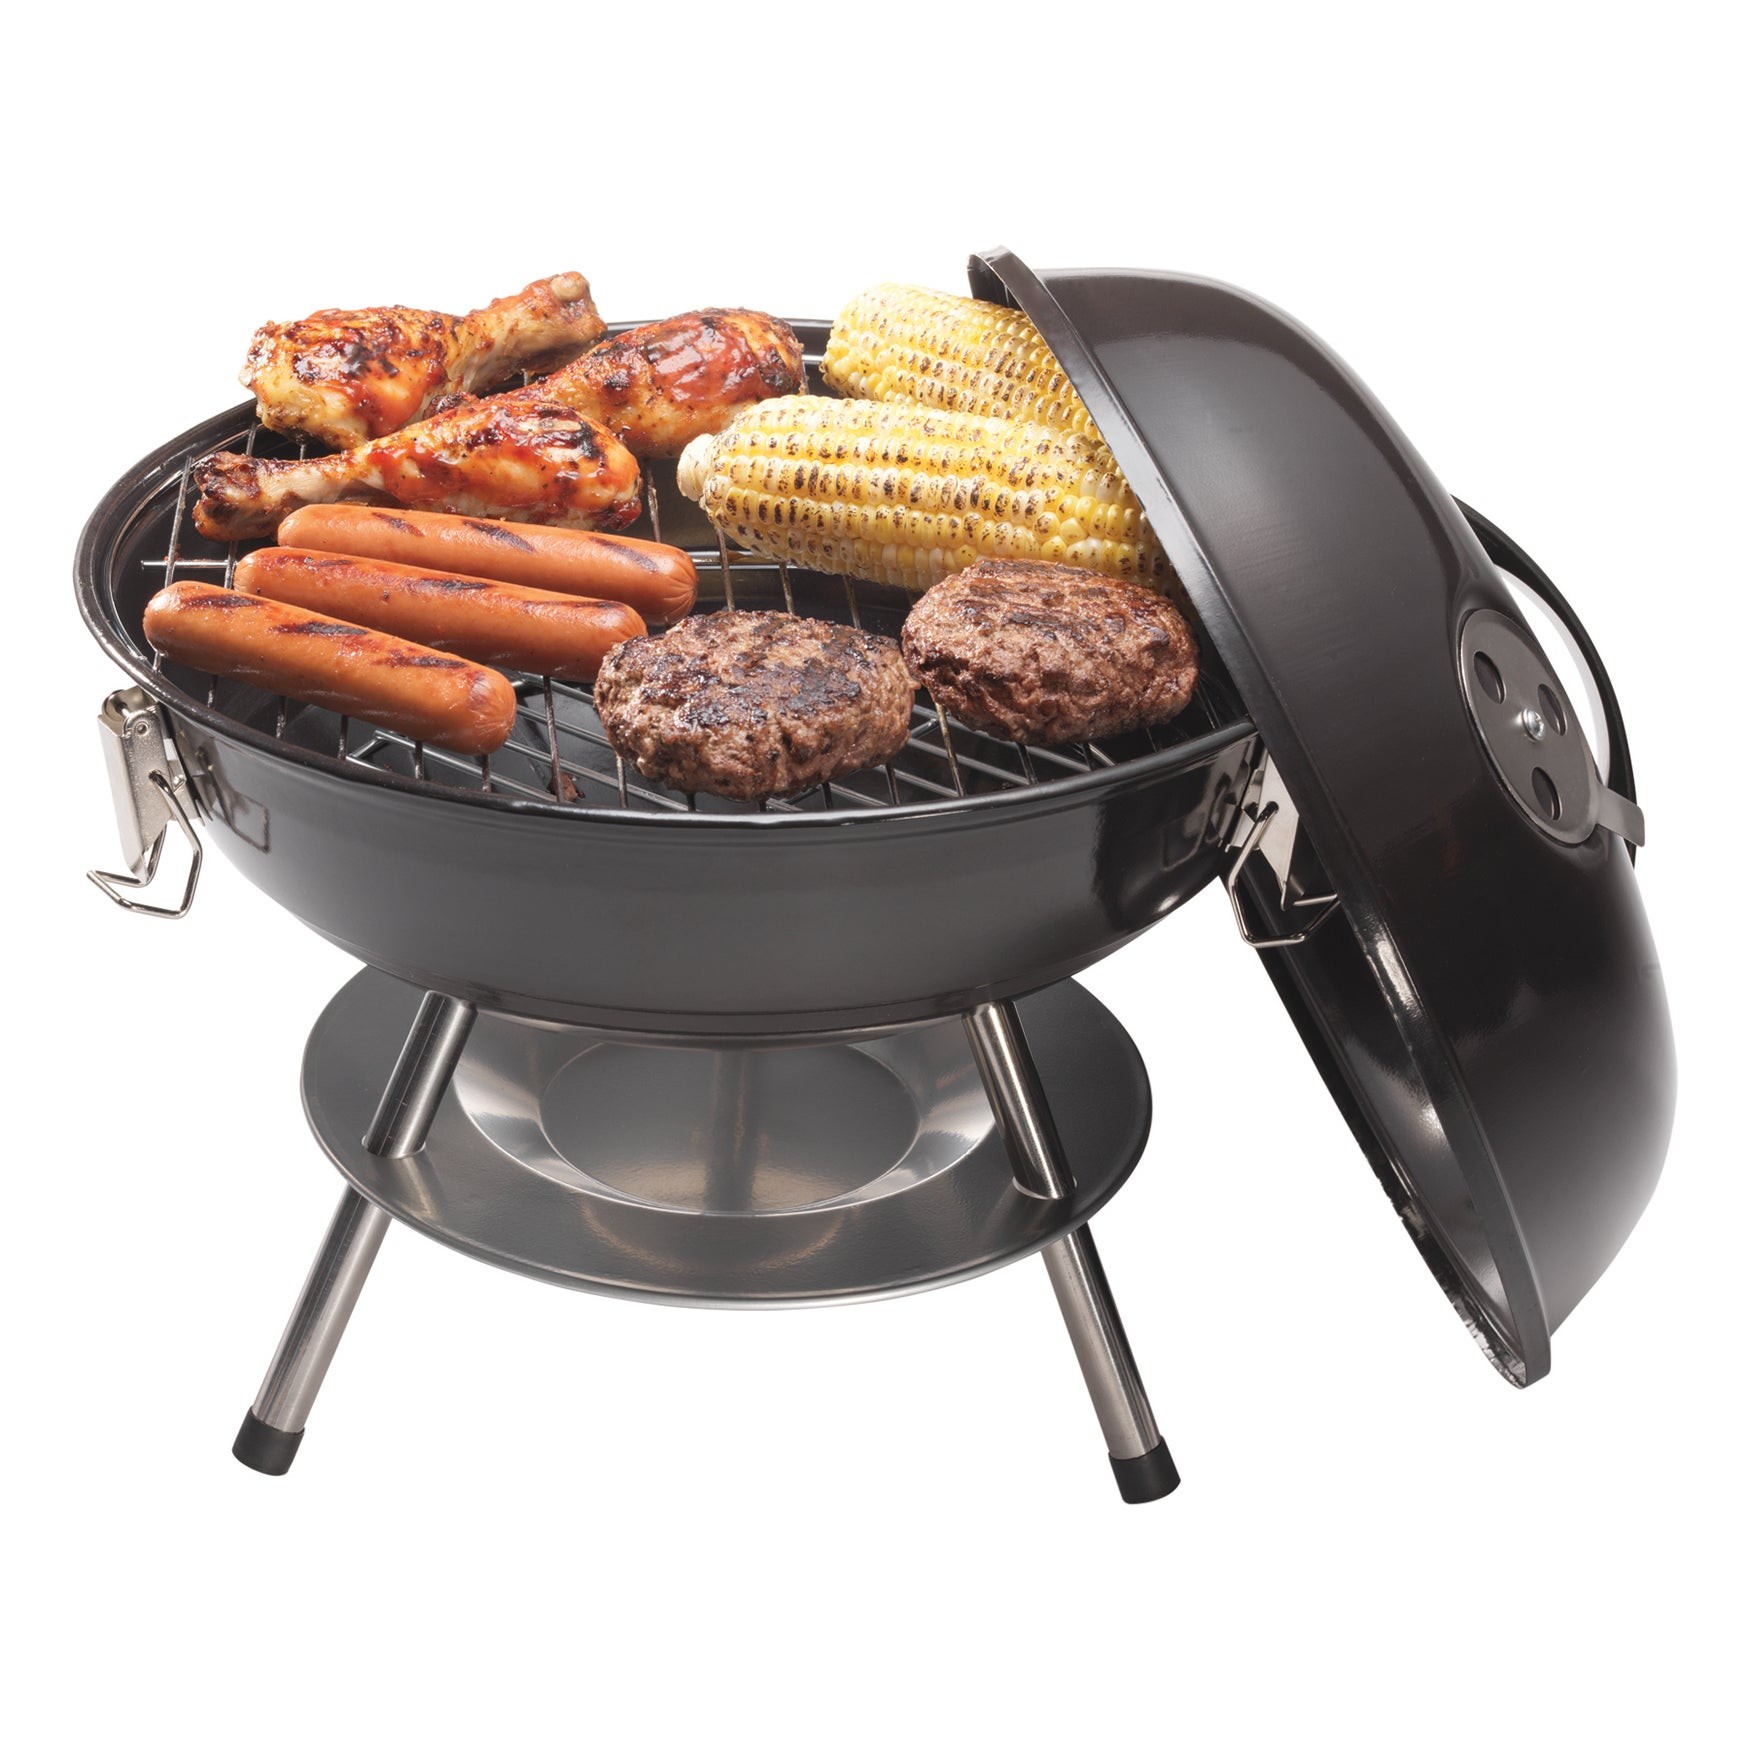 14" Charcoal Grill Black